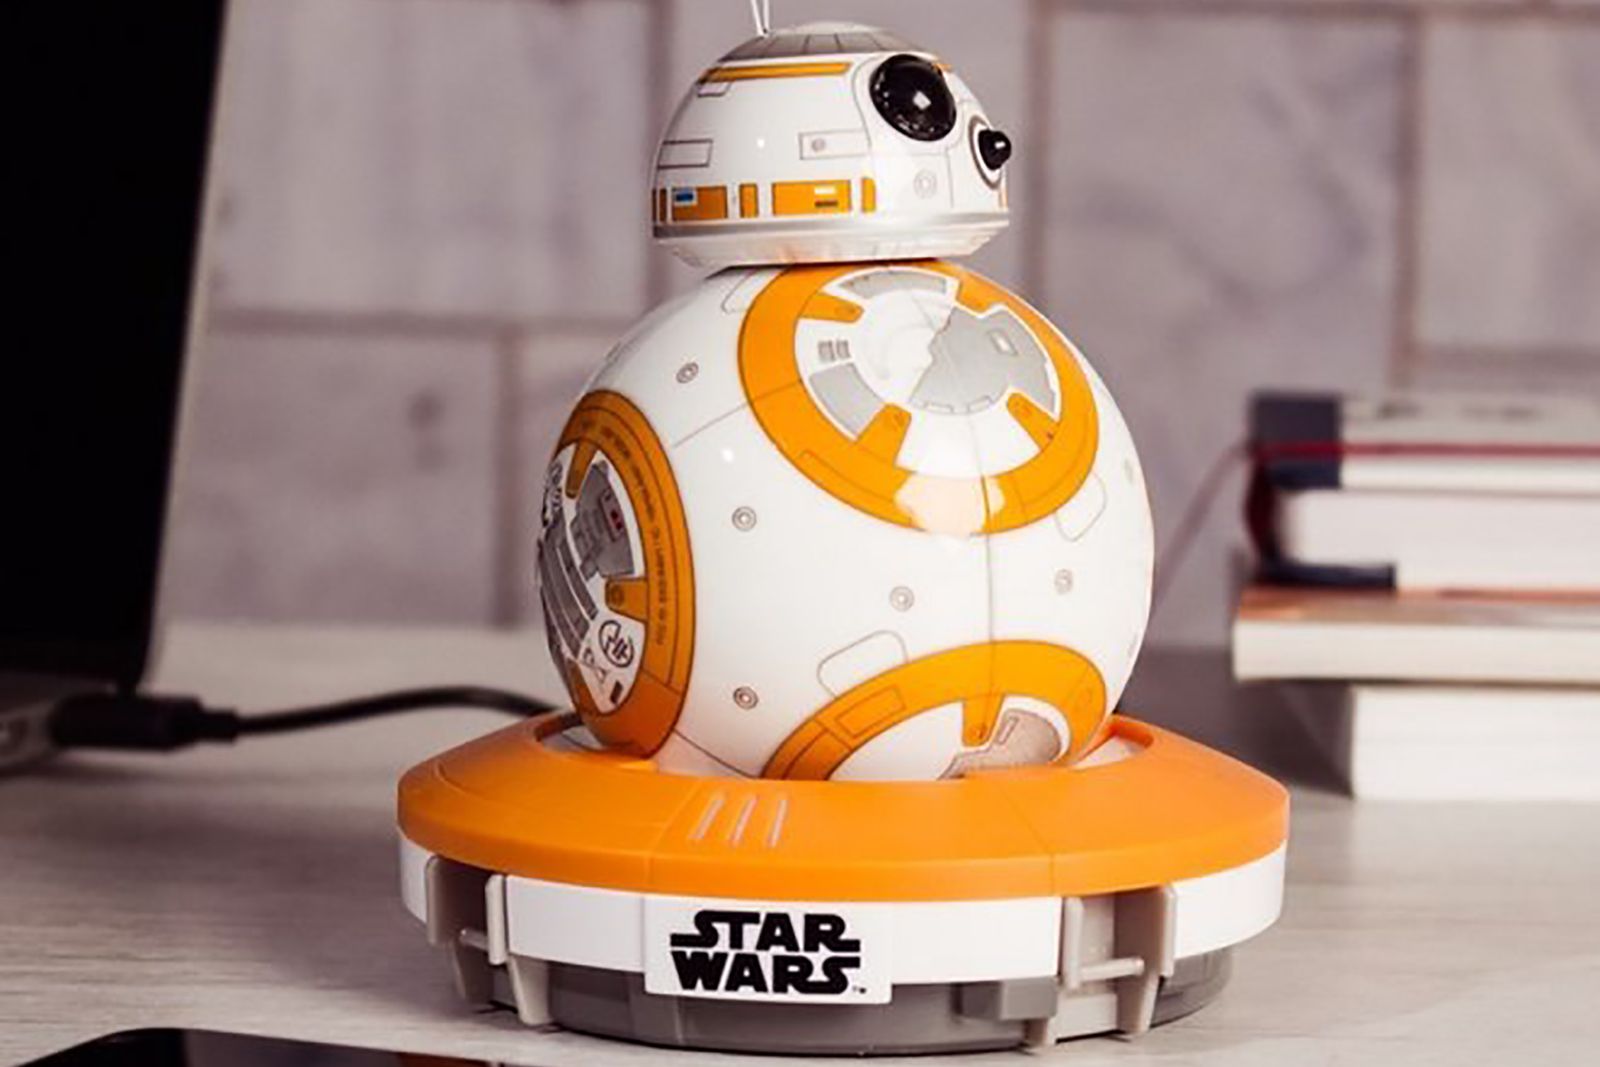 Best Star Wars toys and gadgets for Padawans and Jedi Masters alike image 2